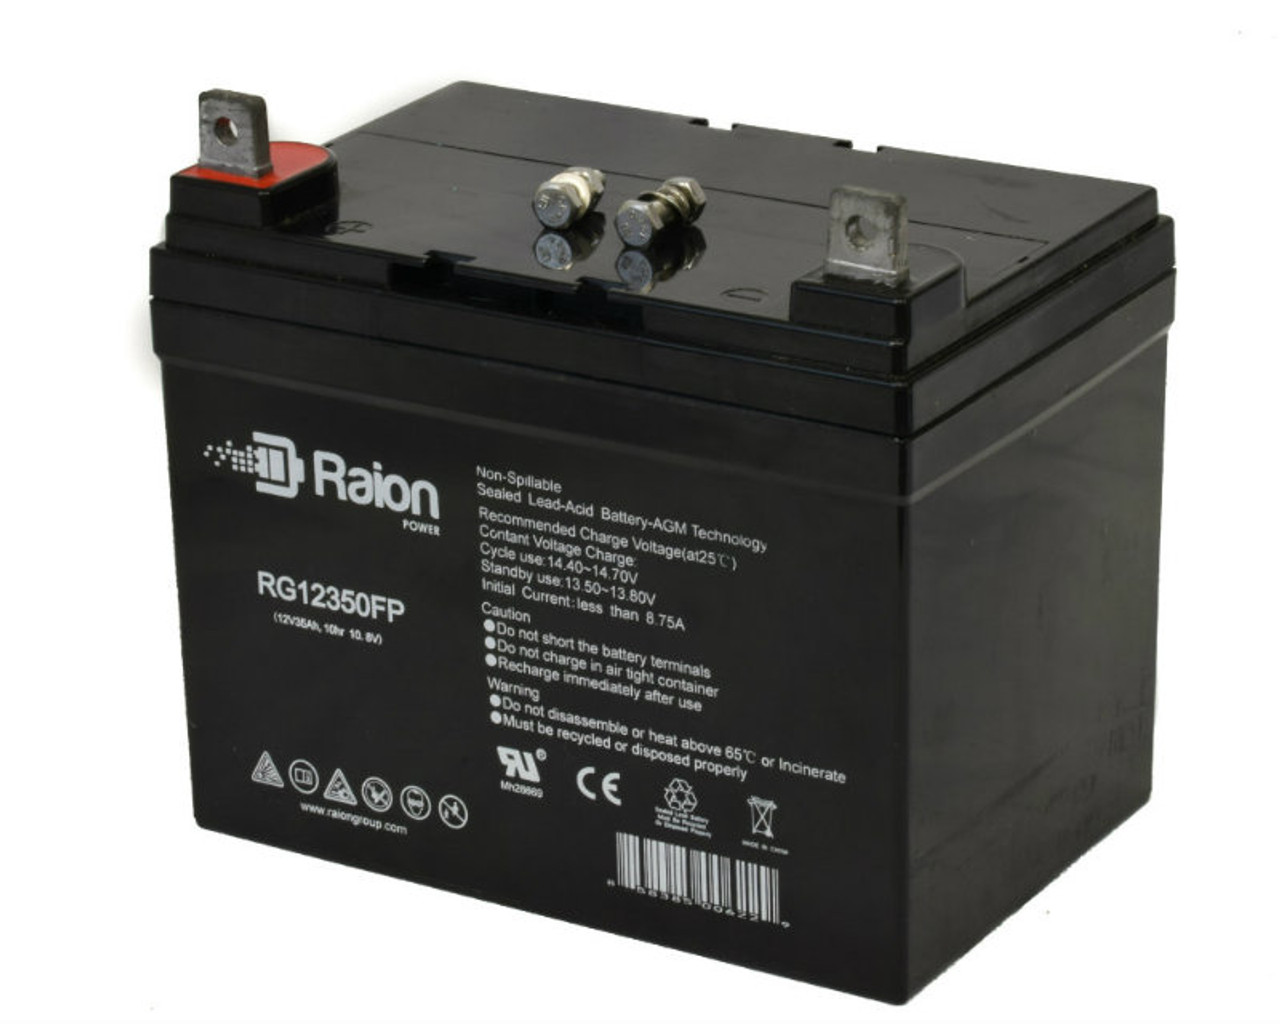 Raion Power Replacement 12V 35Ah RG12350FP Battery for Toro 30192